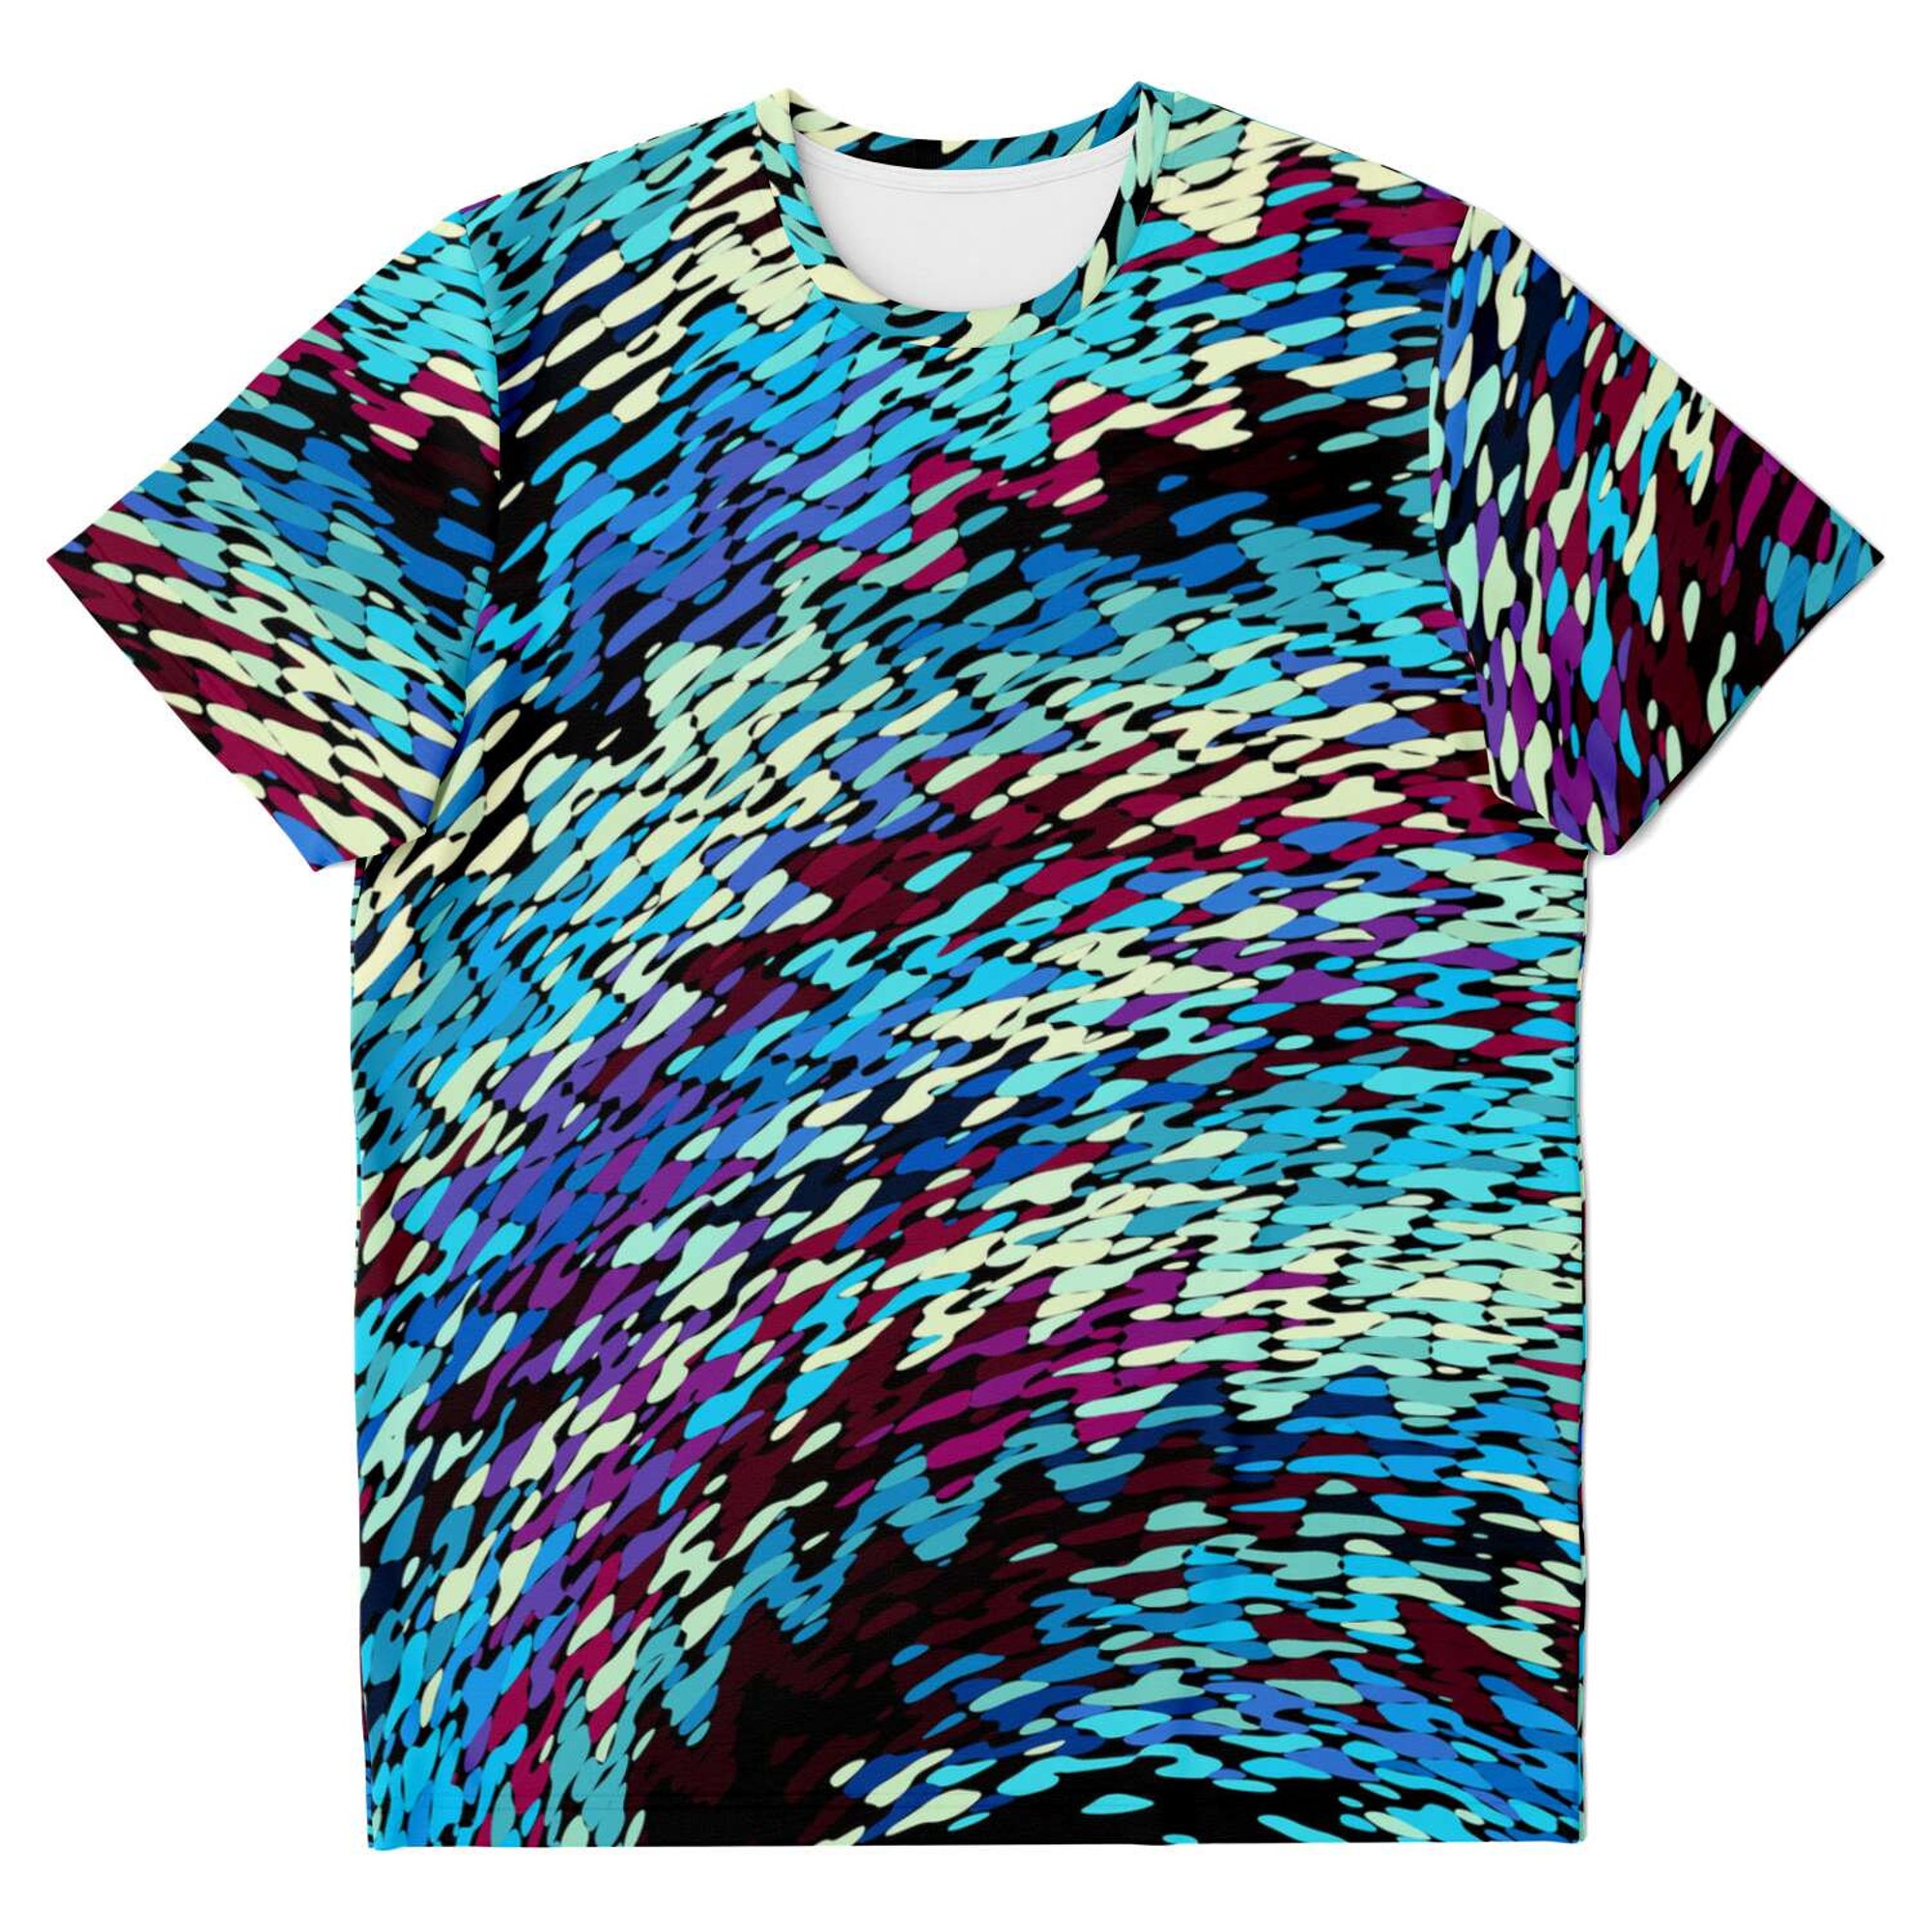 Discover Beach Waves Ocean Wave Effect Abstract Tropical Psychedelic 3D T Shirt